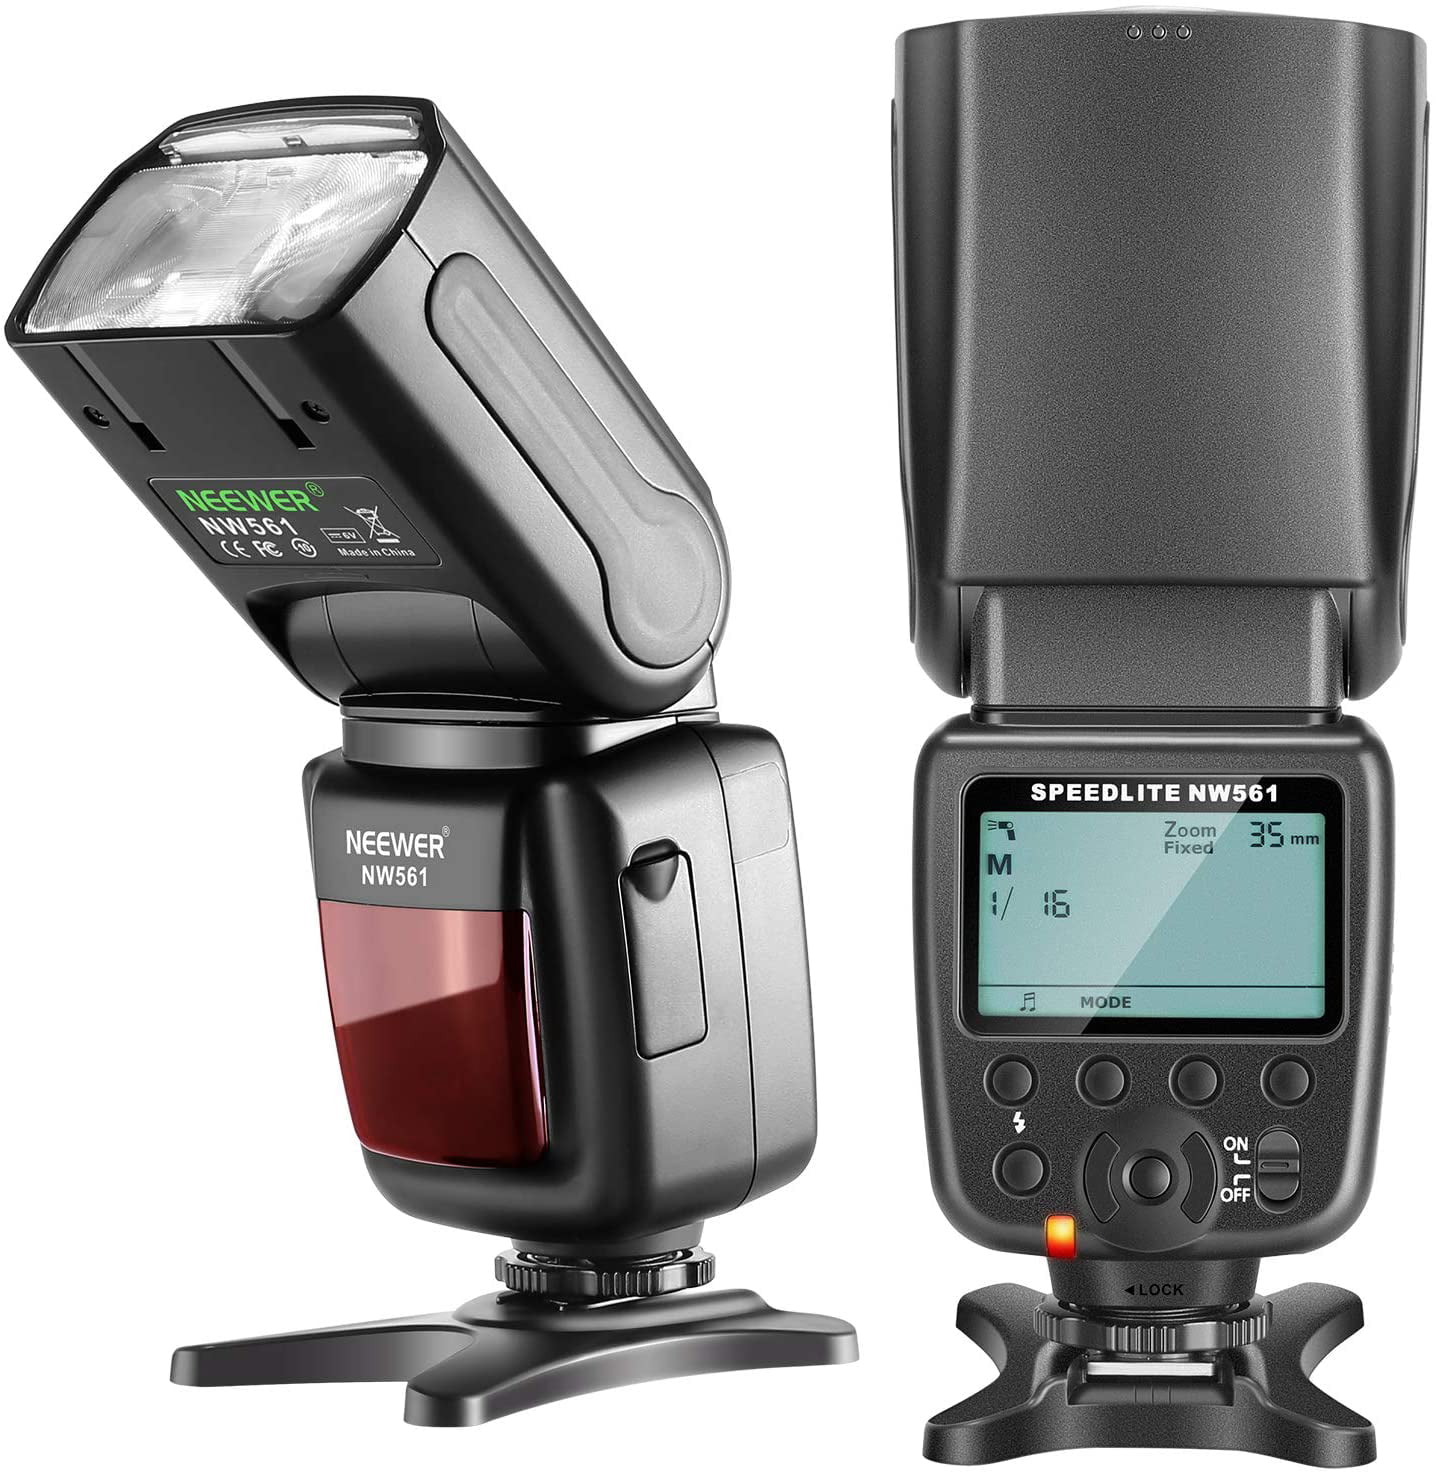 NW561 LCD Display Flash Speedlite for Canon Nikon Olympus Pentax Fijifilm and Sony with Mi Hot Shoe,DSLR and Mirrorless Cameras with Standard Hot Shoe -